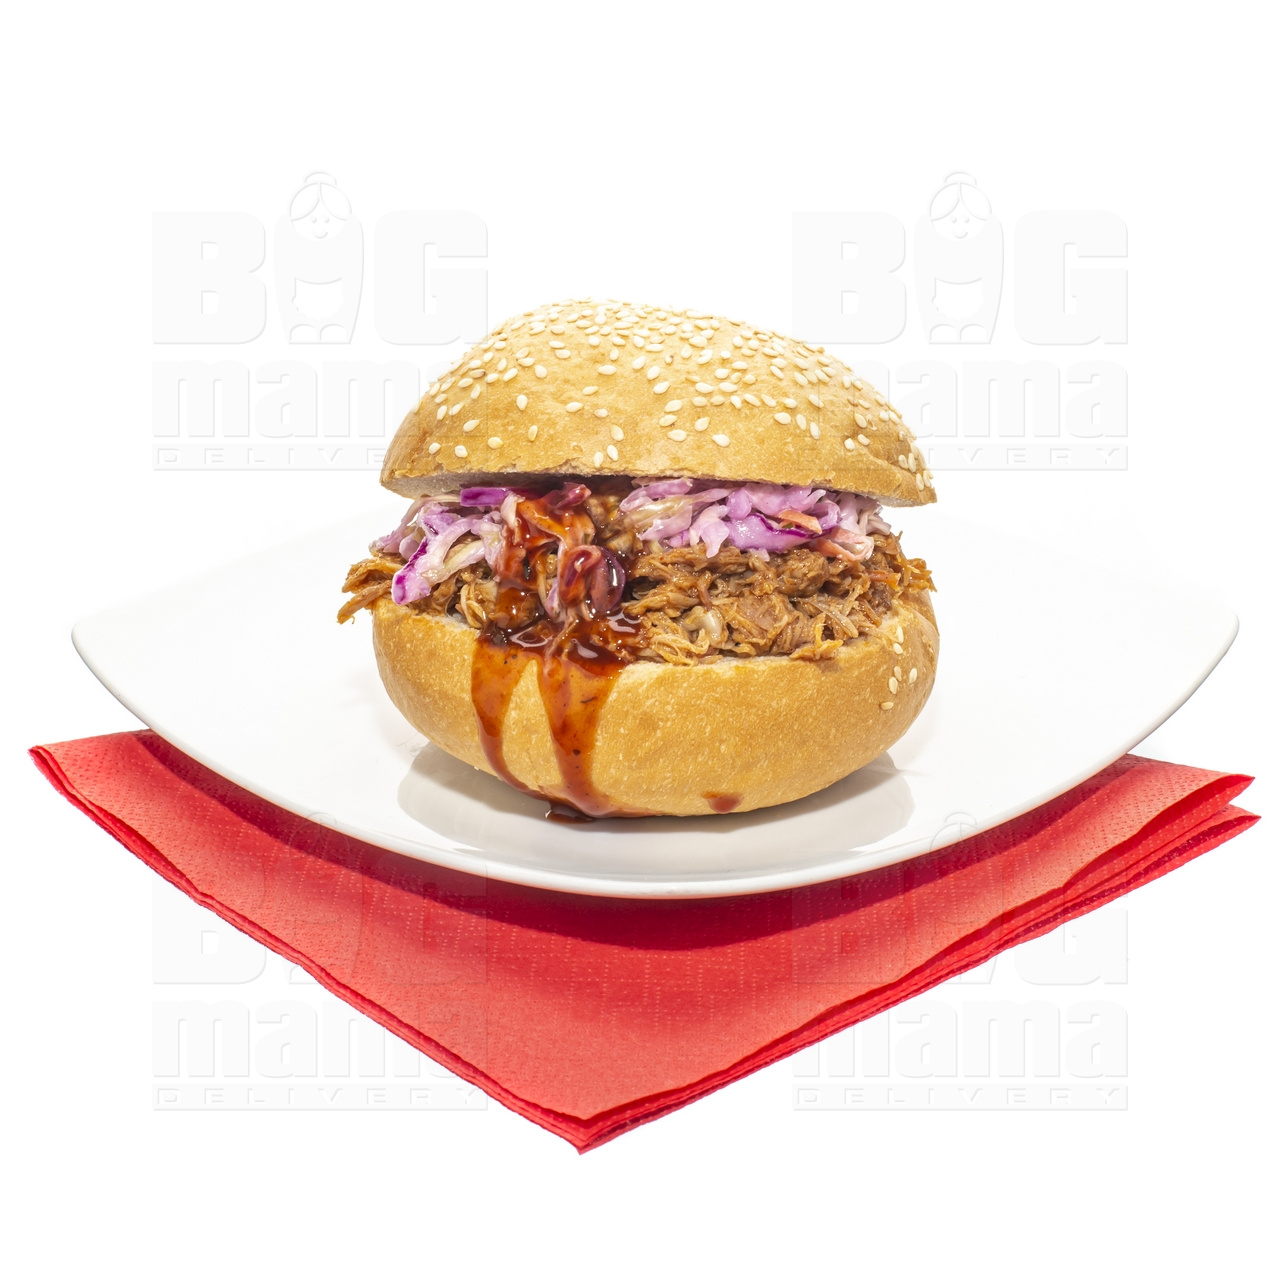 Product #206 image - BBQ Pulled pork sandwich